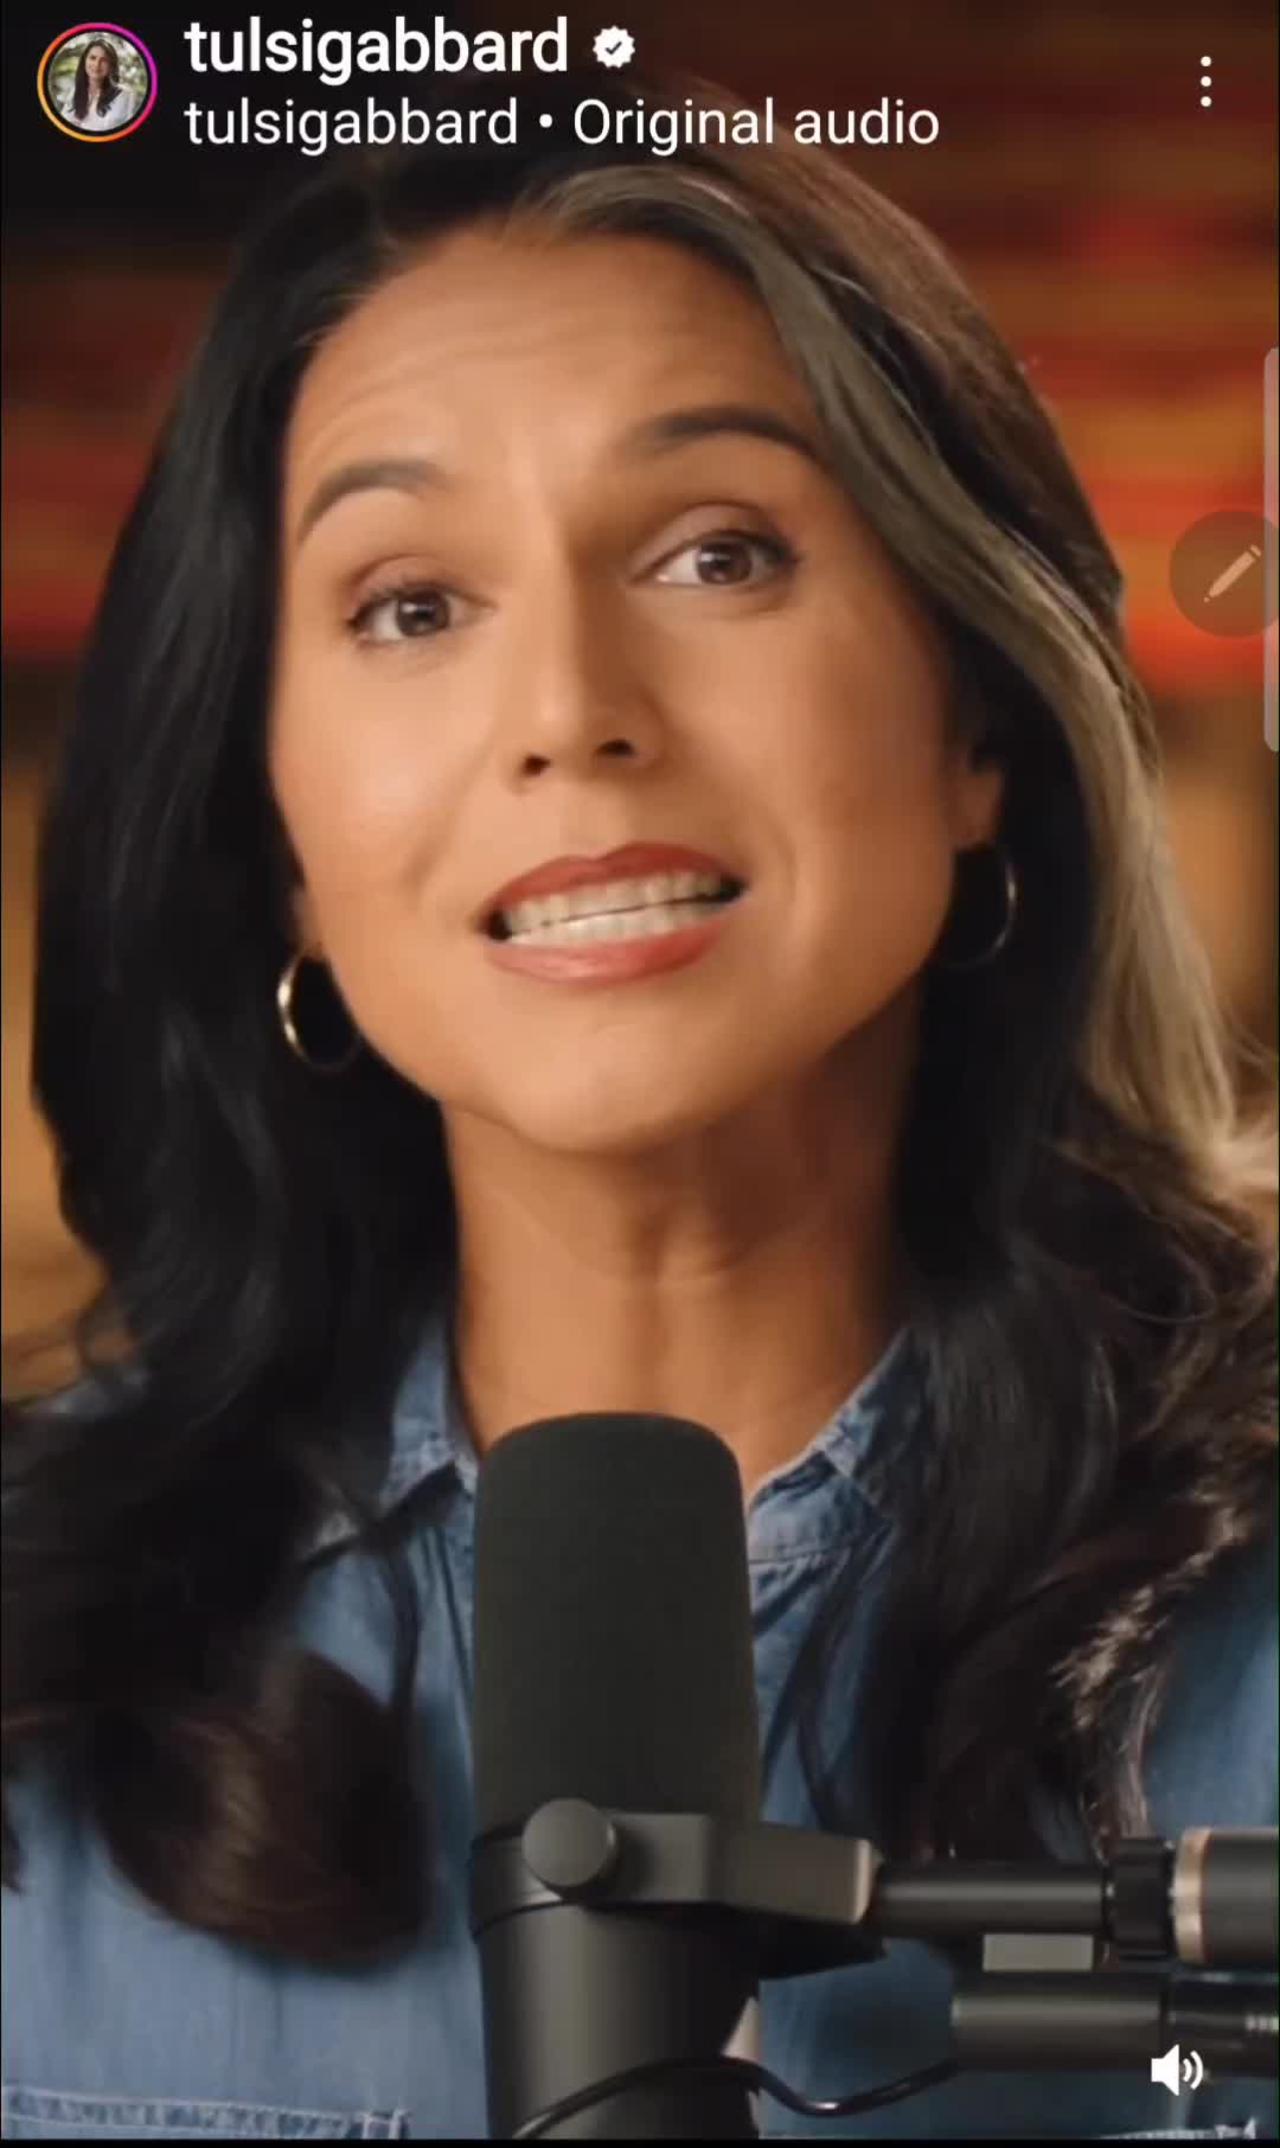 Tulsi Gabbard speaks out after leaving 'woke' Democratic Party: